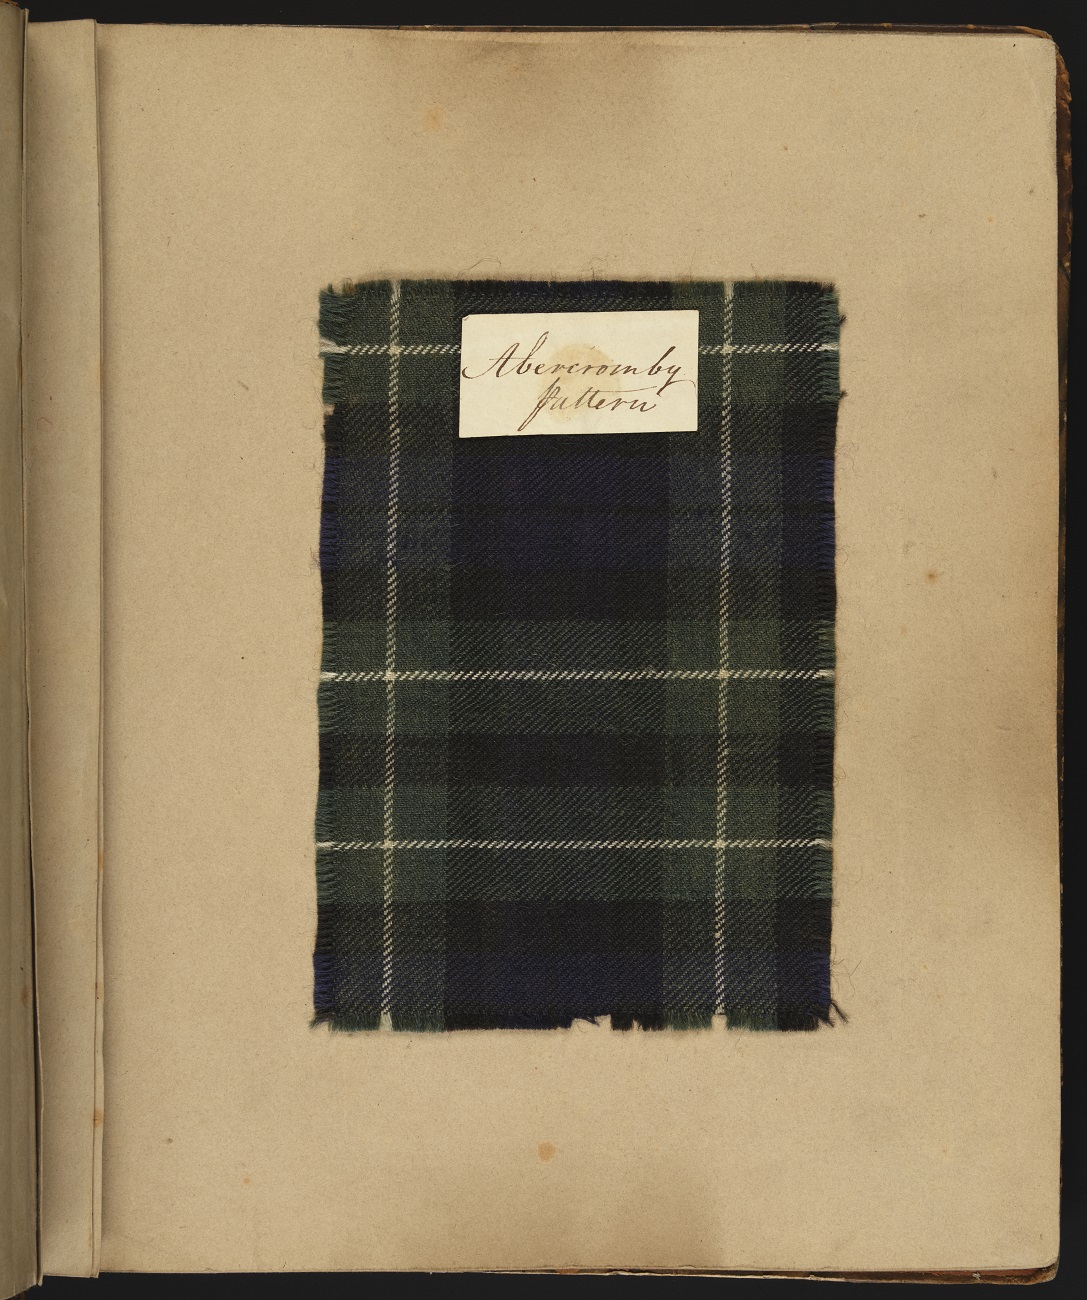 A sample of ‘Abercromby’ tartan, c.1822. Collected by the English antiquarian Sir Samuel Rush Meyrick, it is a commemorative tartan created in honour of General Sir Ralph Abercromby. (H.TTB 8)